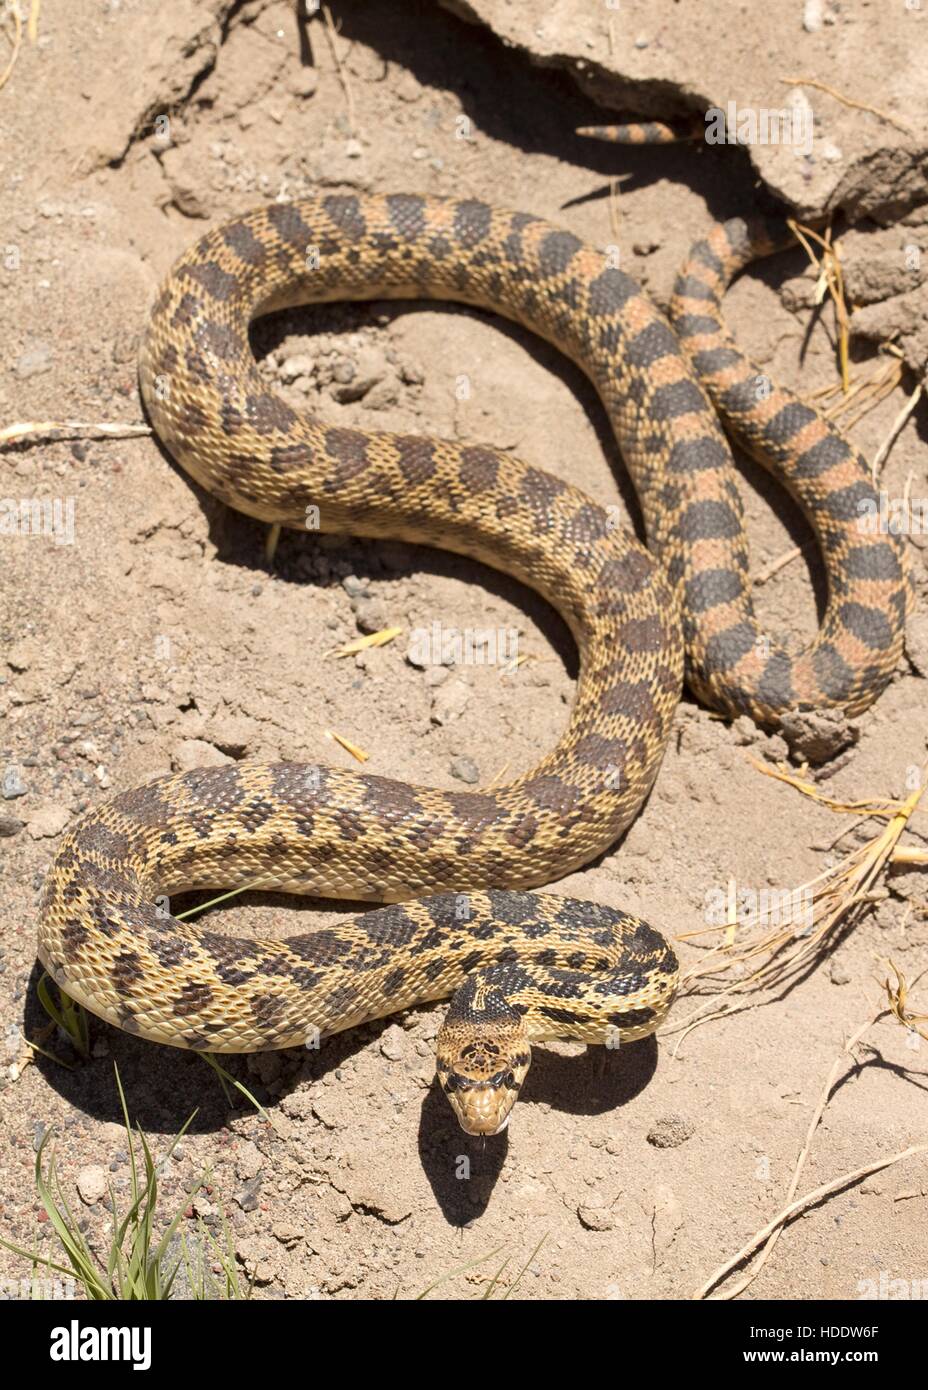 A yellow and brown spotted Pacific gopher snake slithers along the arid, rocky desert ground June 19, 2012 in Oregon. Stock Photo